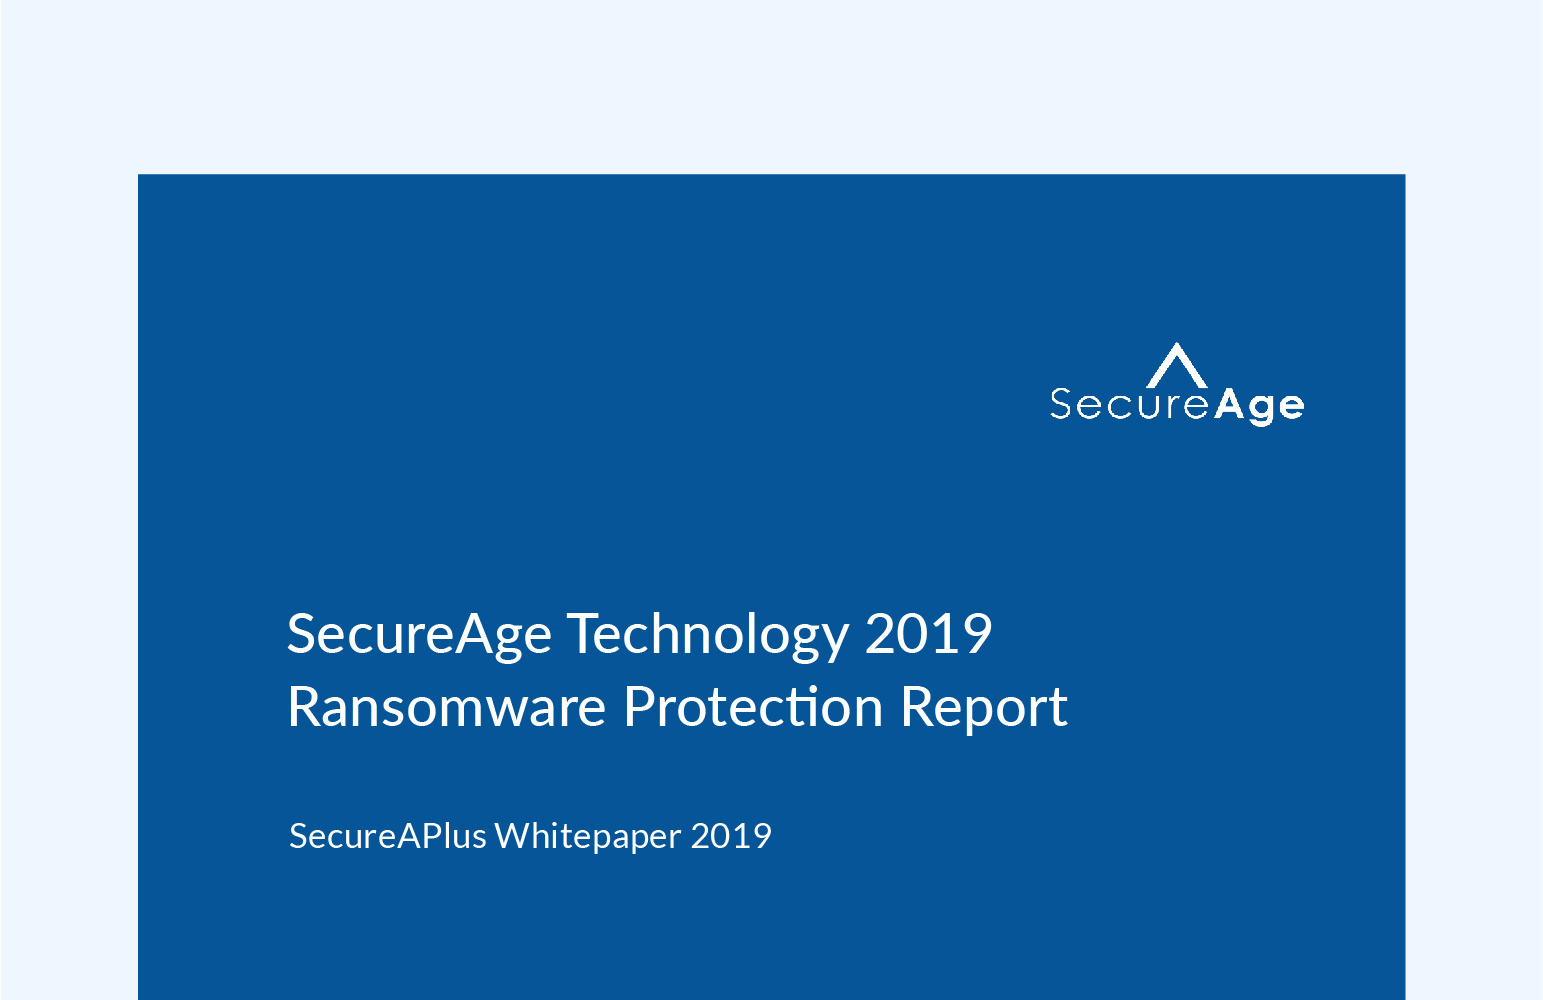 Ransomware Protection 2019 Report